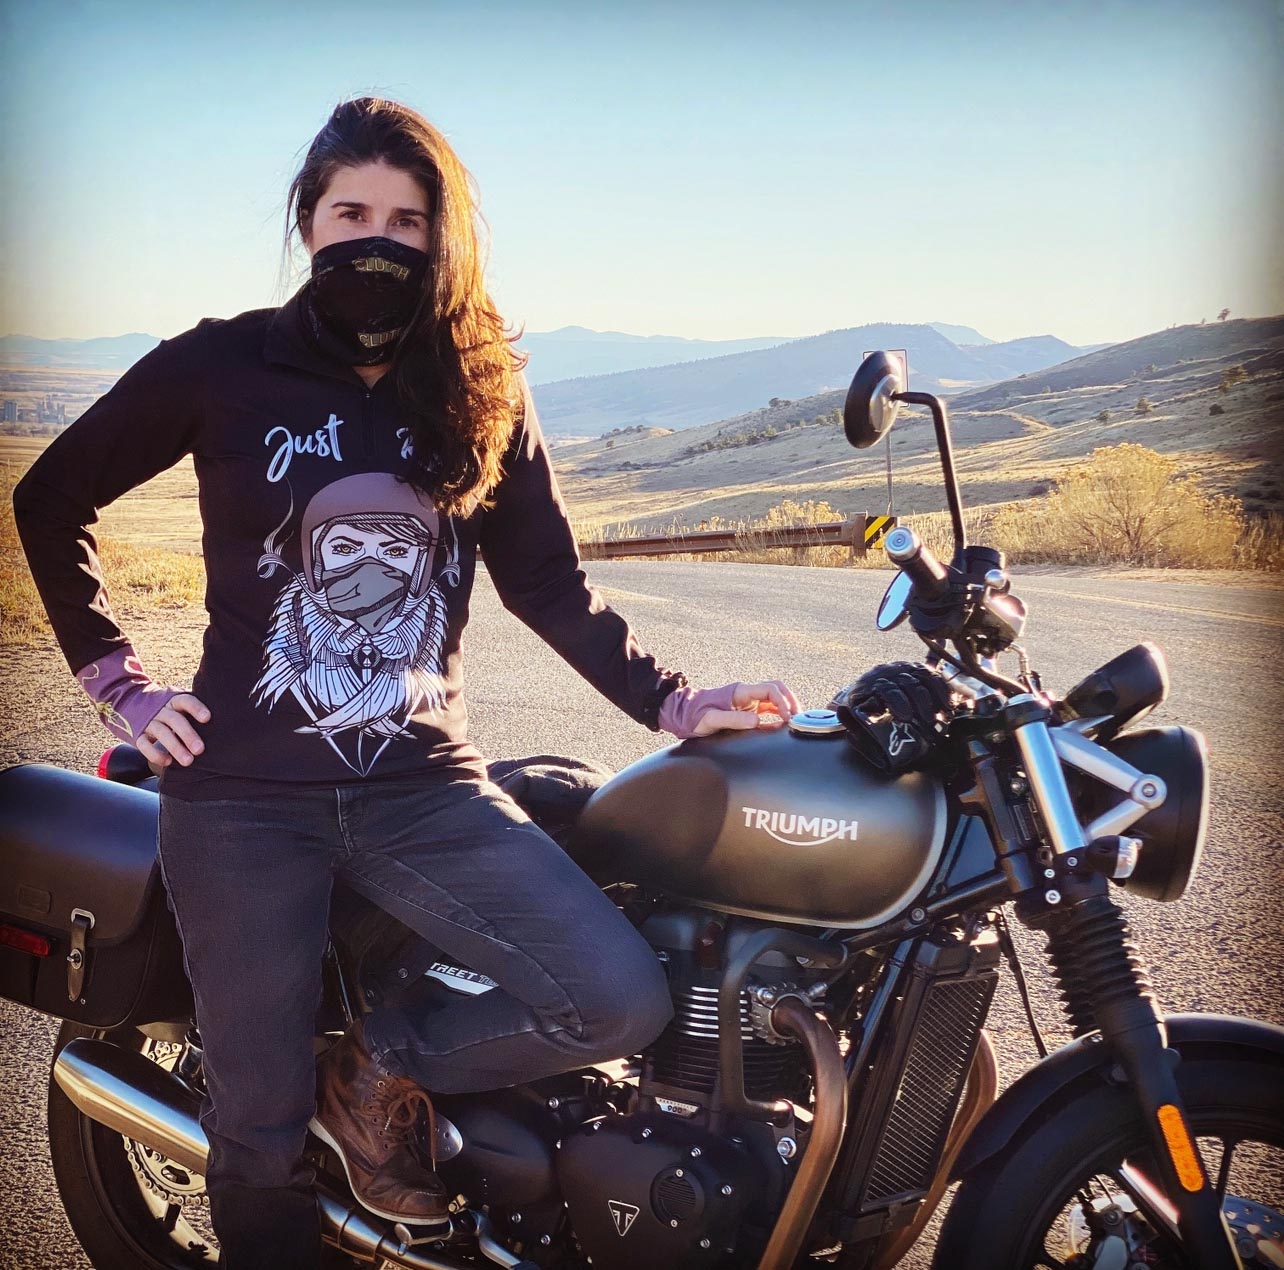 Motorcycles made a big impression on Piper, shown here with her Triumph Street Twin. She bought the school where she had taken her MSF Basic RiderCourse and became an MSF-certified RiderCoach.